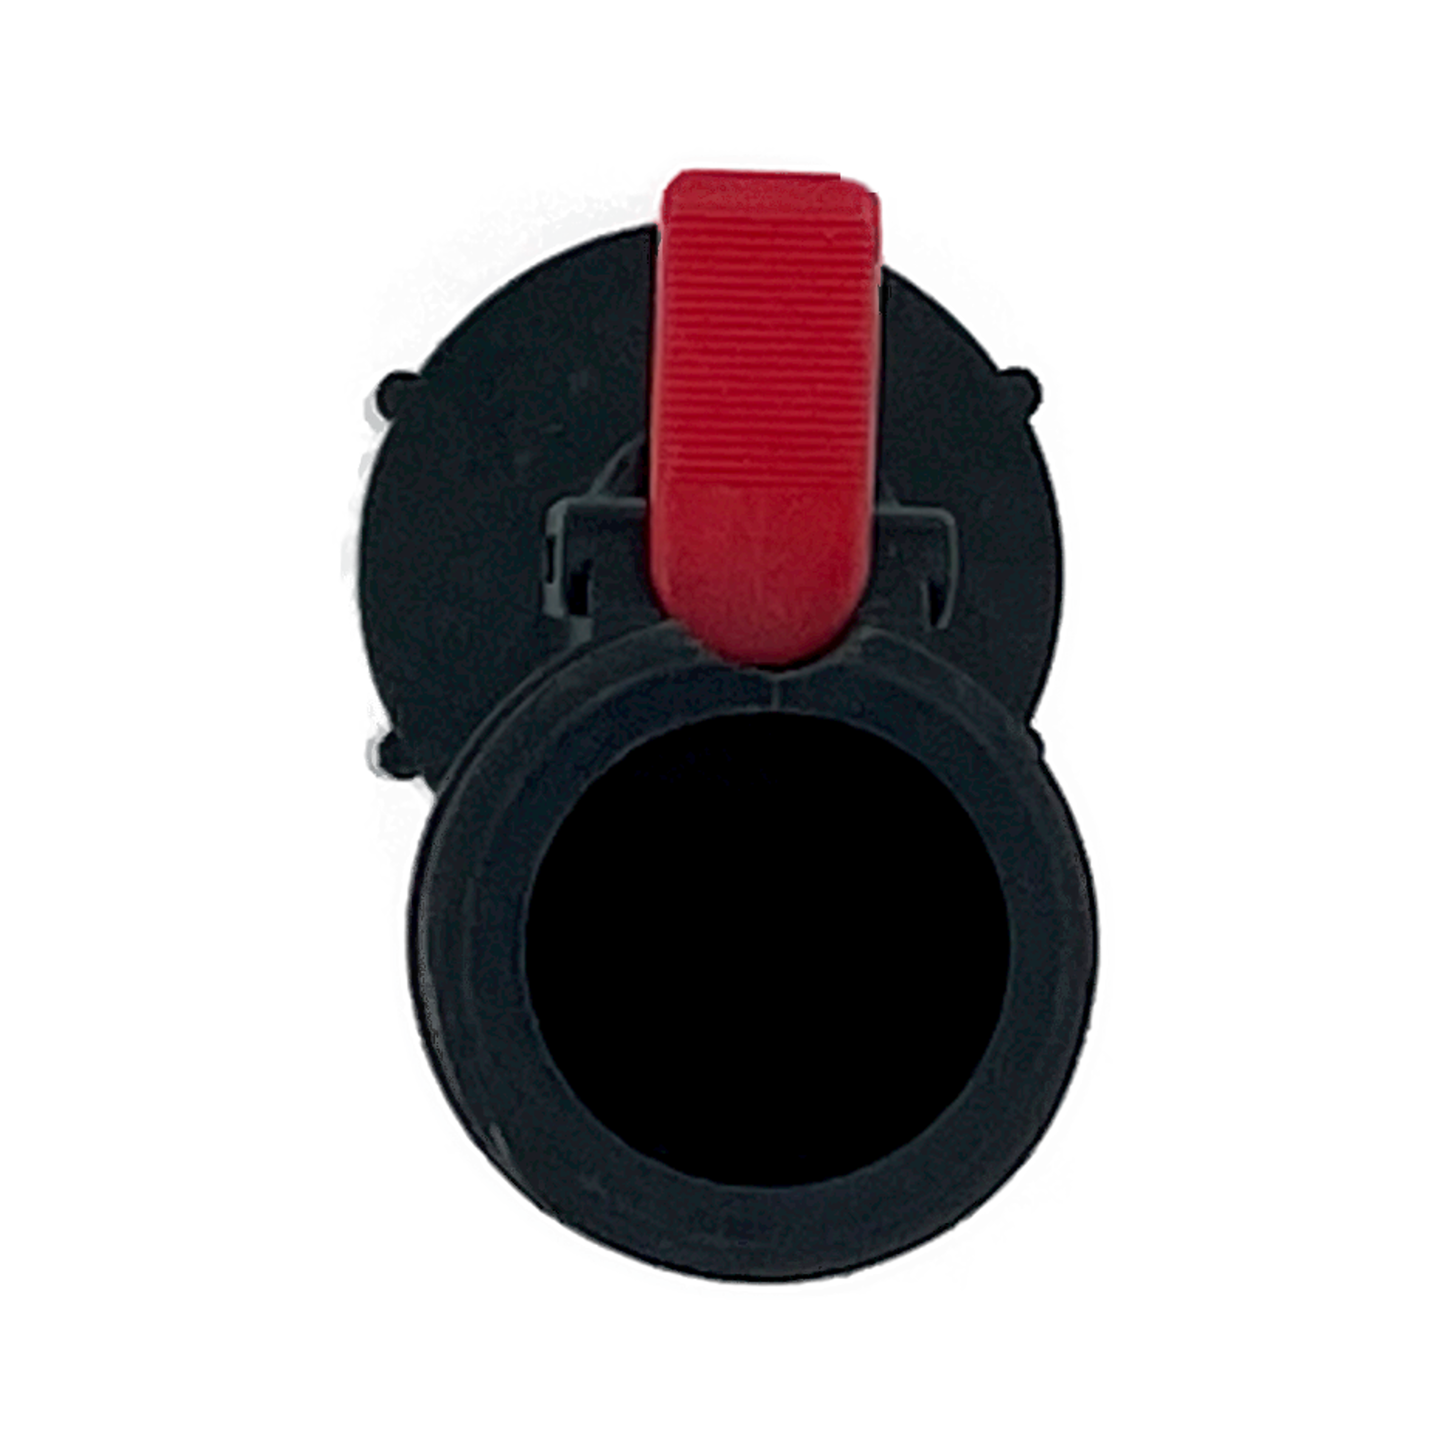 The Water Block downstream reset add-on. Red lever with black exterior. Made of hard plastic and simply screws onto the Water Block water shutoff valve. This red lever add-on screws onto your Water Block's shutoff valve for easy downstream resetting, restoring water flow in seconds.